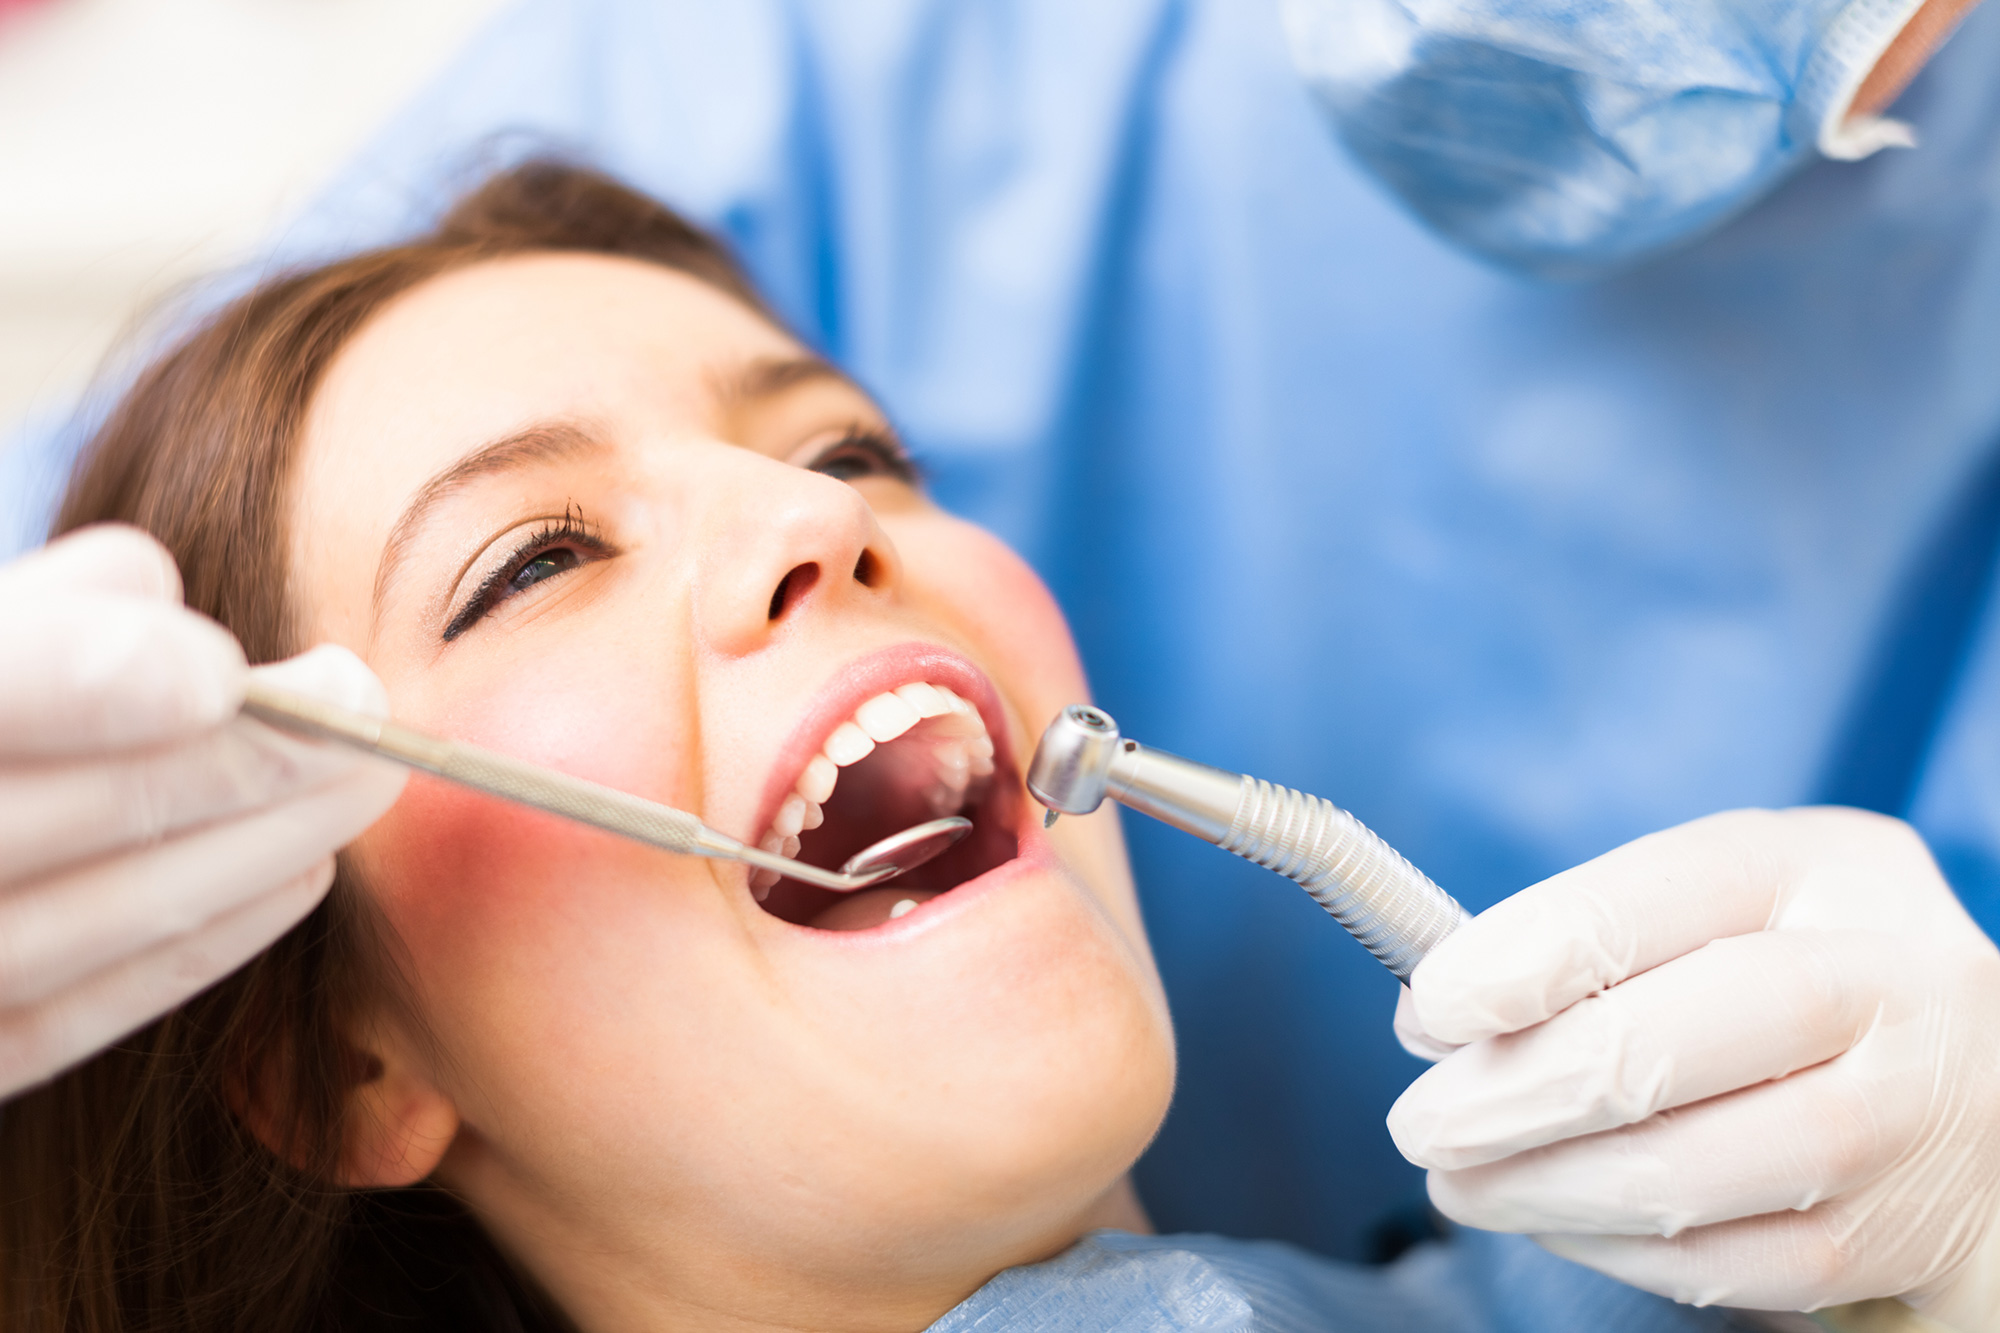 We Invite You to The Top Dentist Bergen County so That You Smile Freely